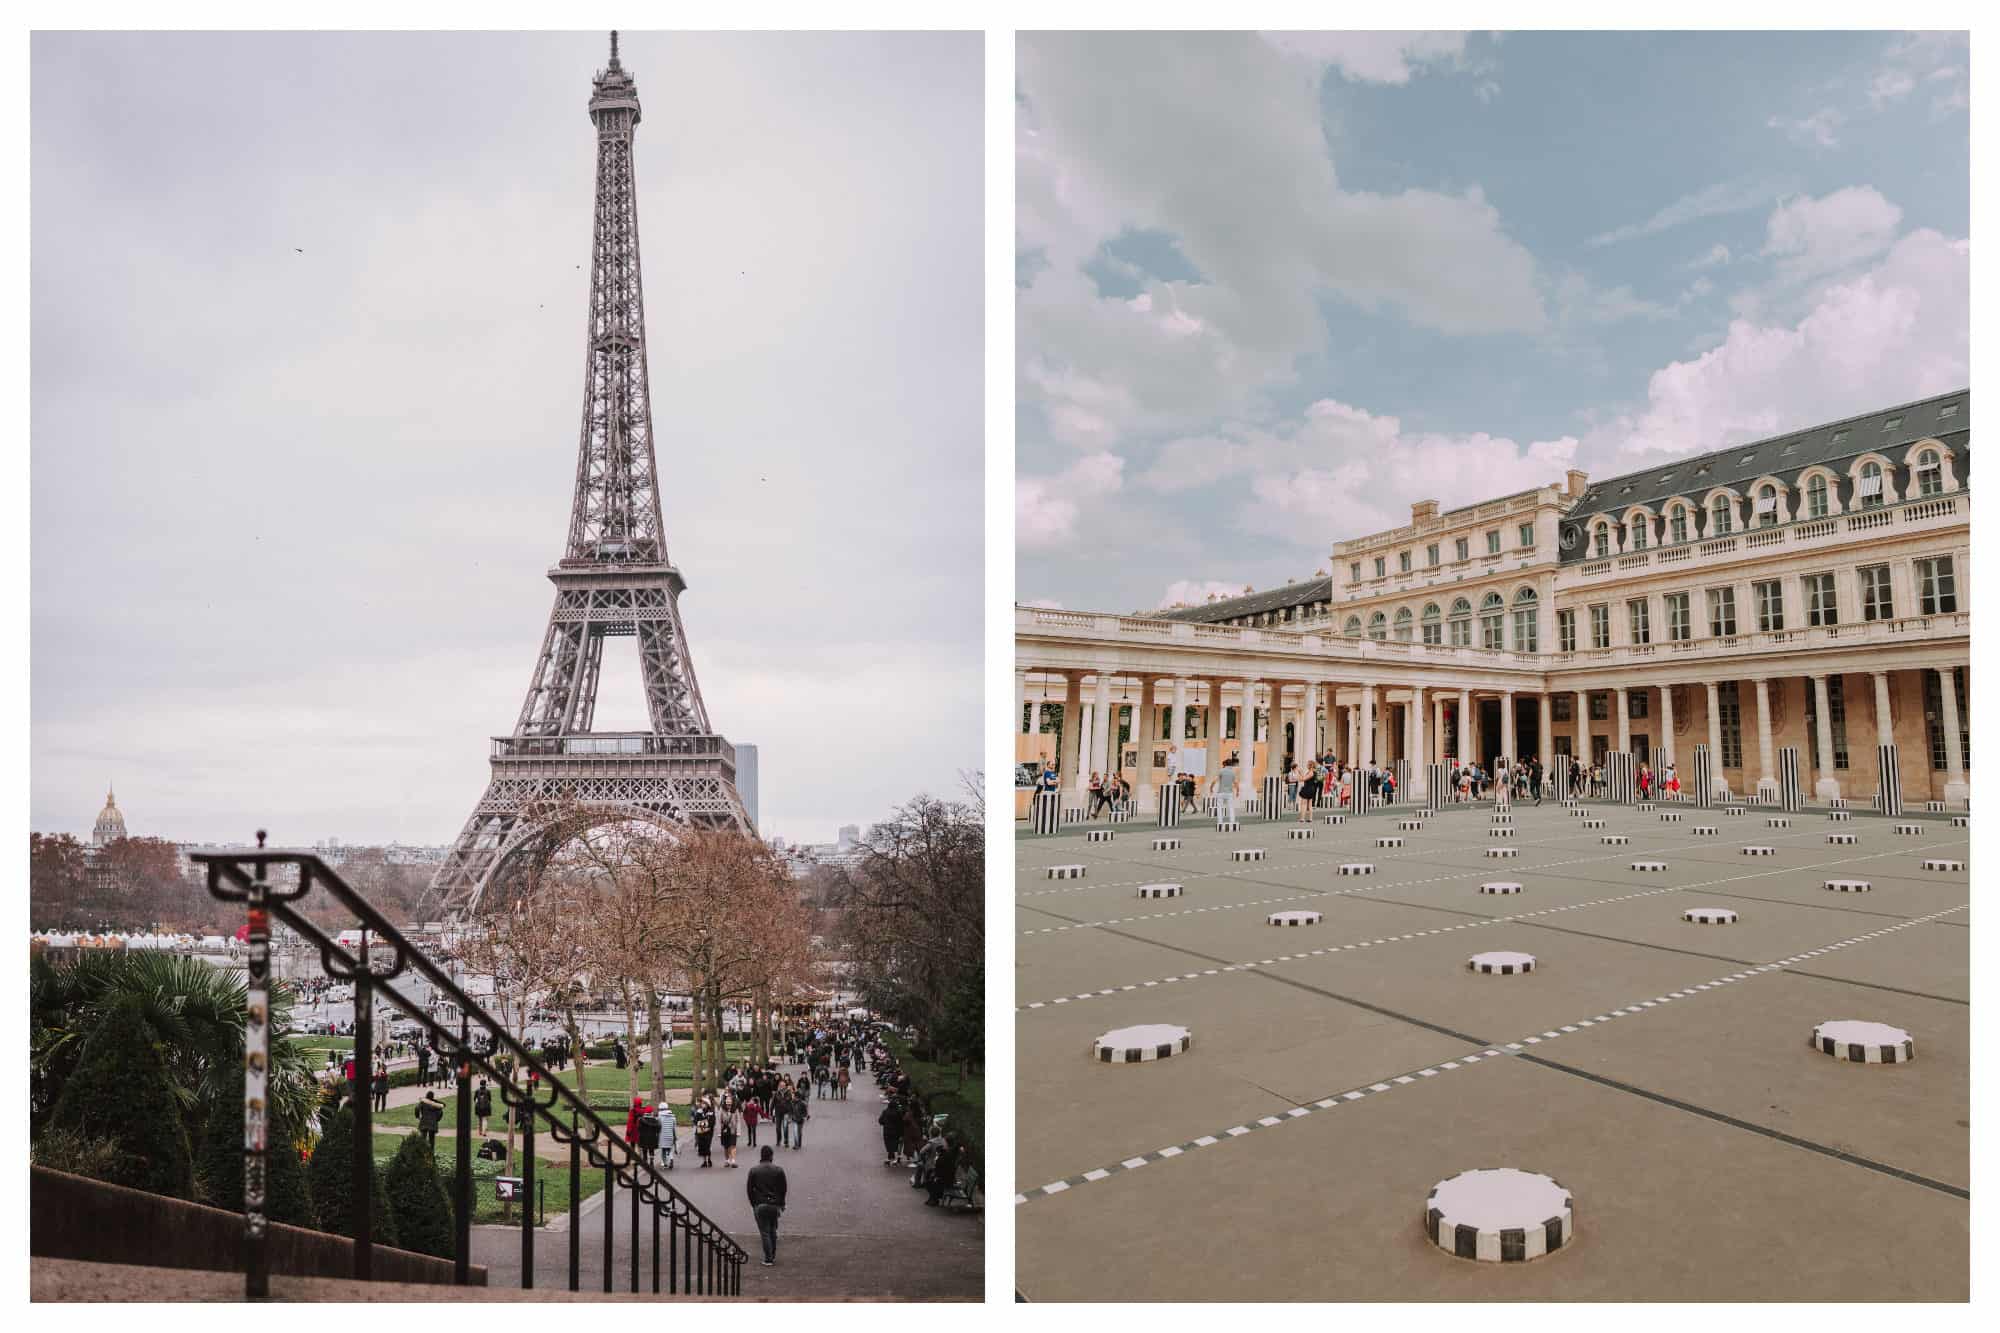 A view of the Eiffel Tower under gray skies in winter (left). Buren's columns art installation in the Jardin du Palais Royal (right).